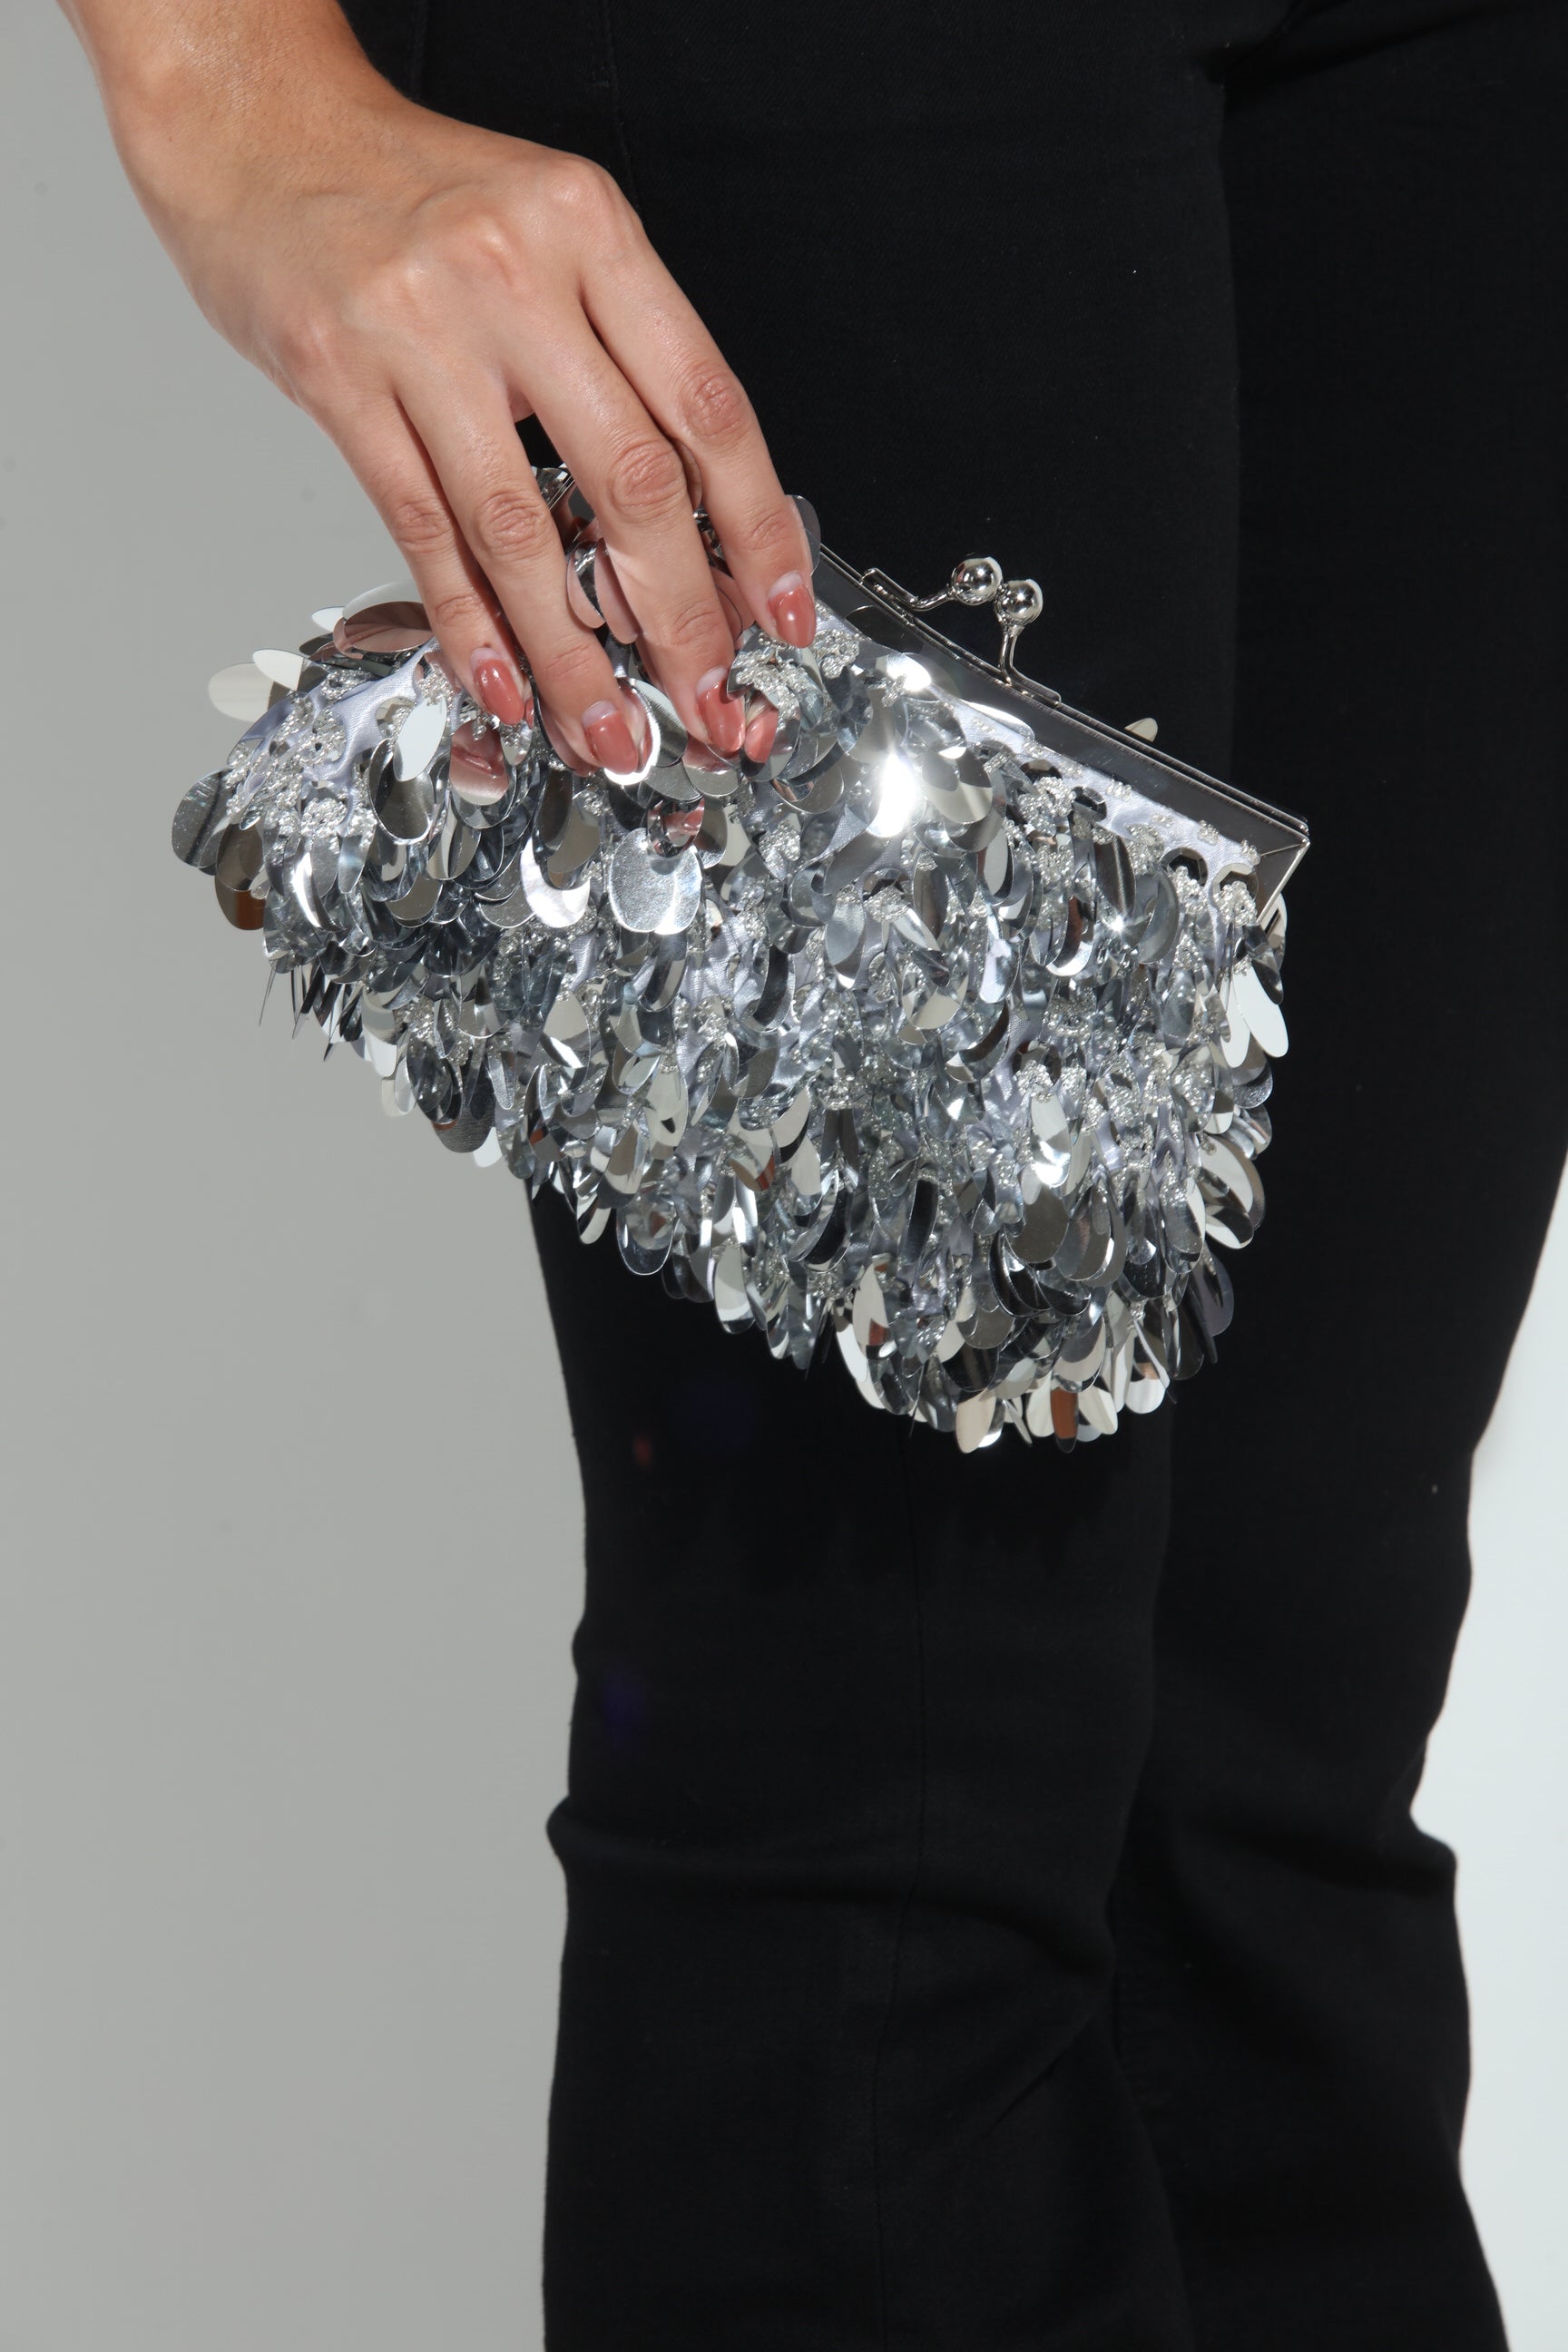 Silver Sequin Party Clutch-BEST SELLER